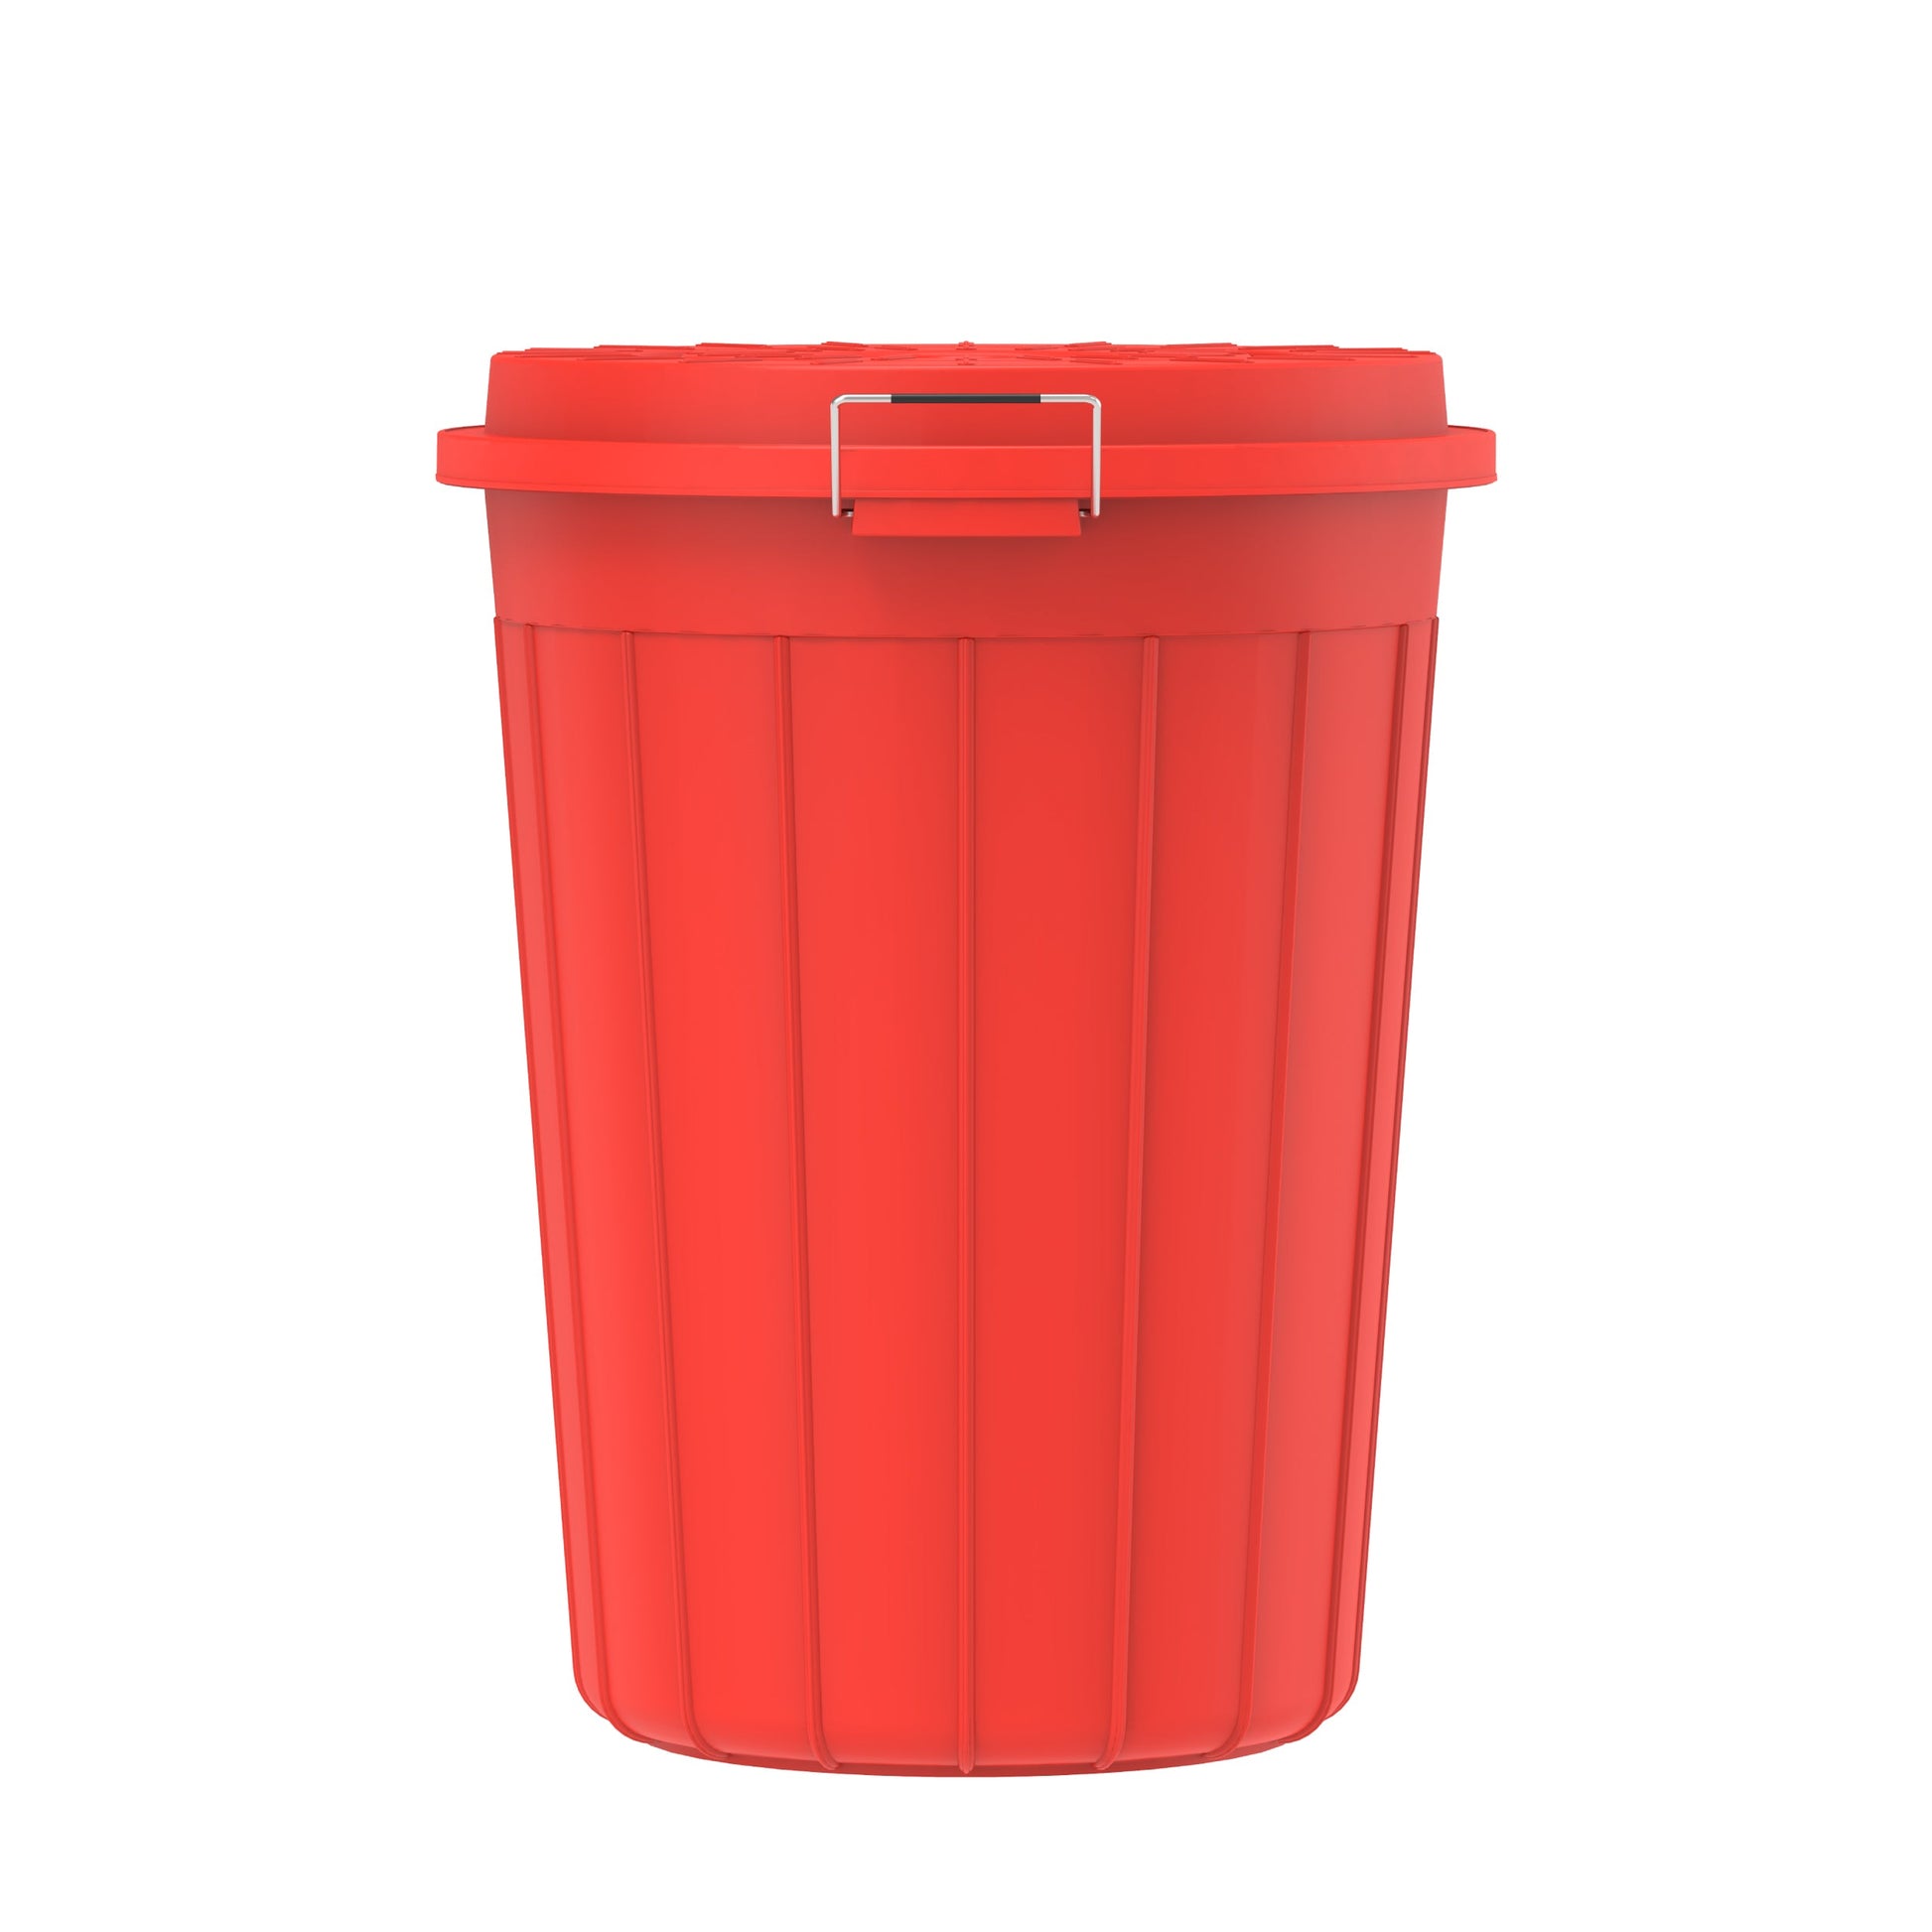 100L Round Plastic Drums with Lid - Cosmoplast Bahrain